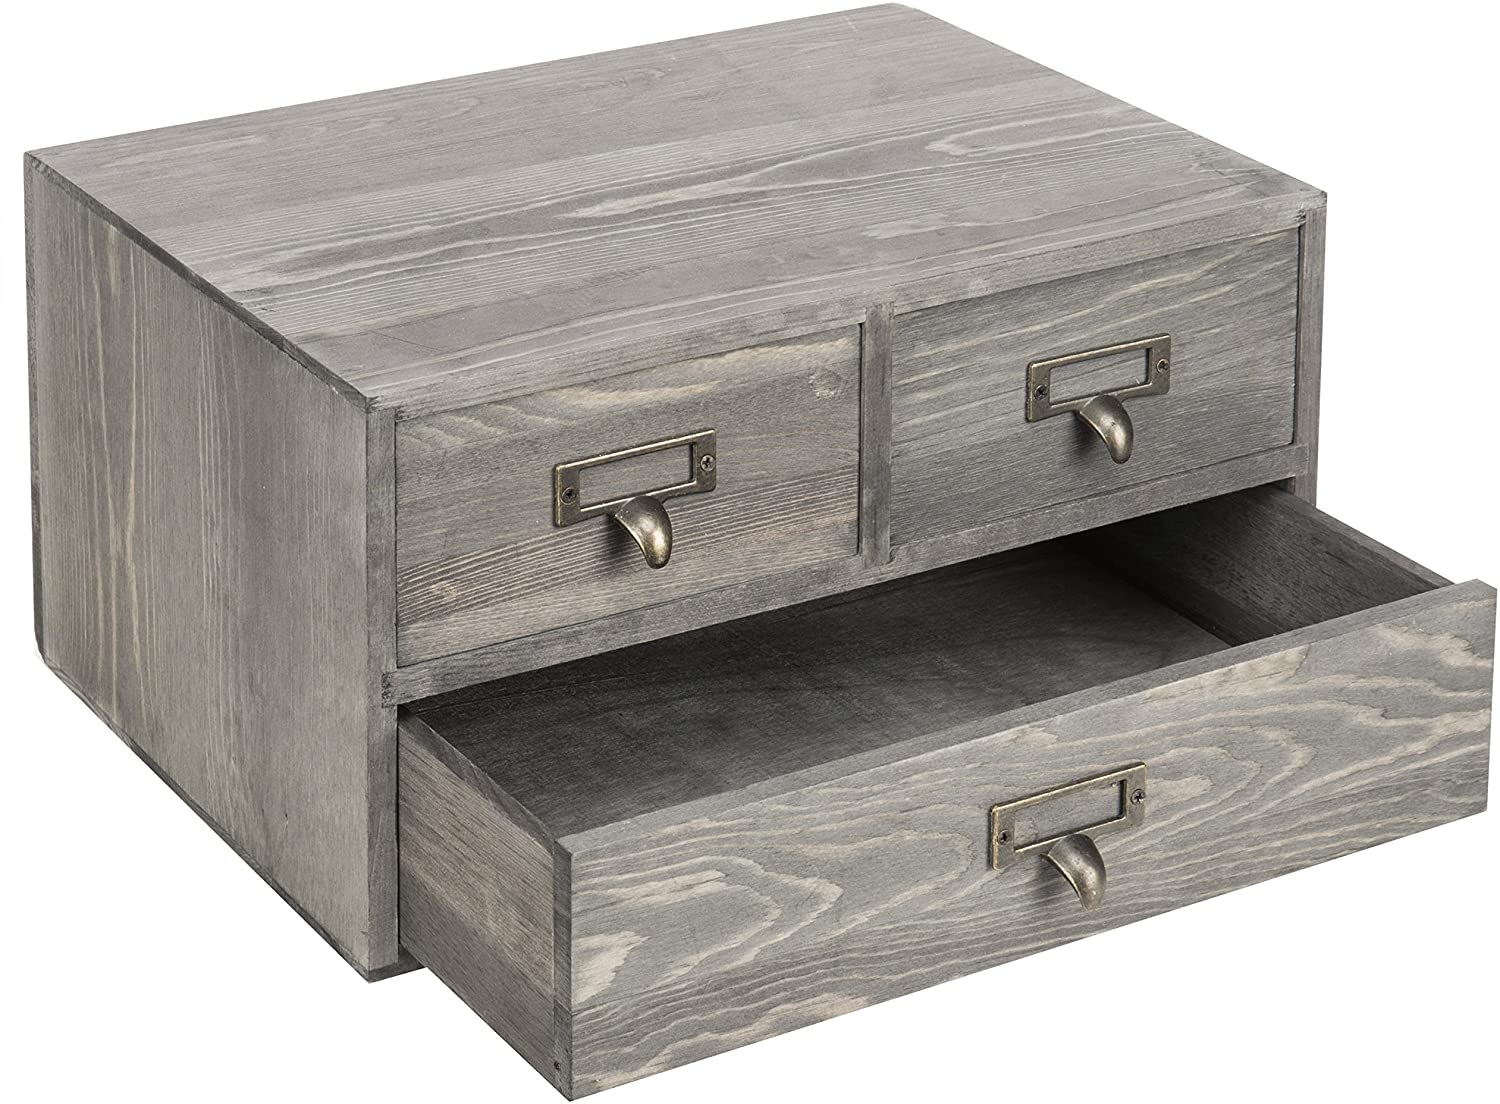 MyGift Rustic Gray Wooden 3-Drawer Desktop Small Wooden Cabinet With Drawers